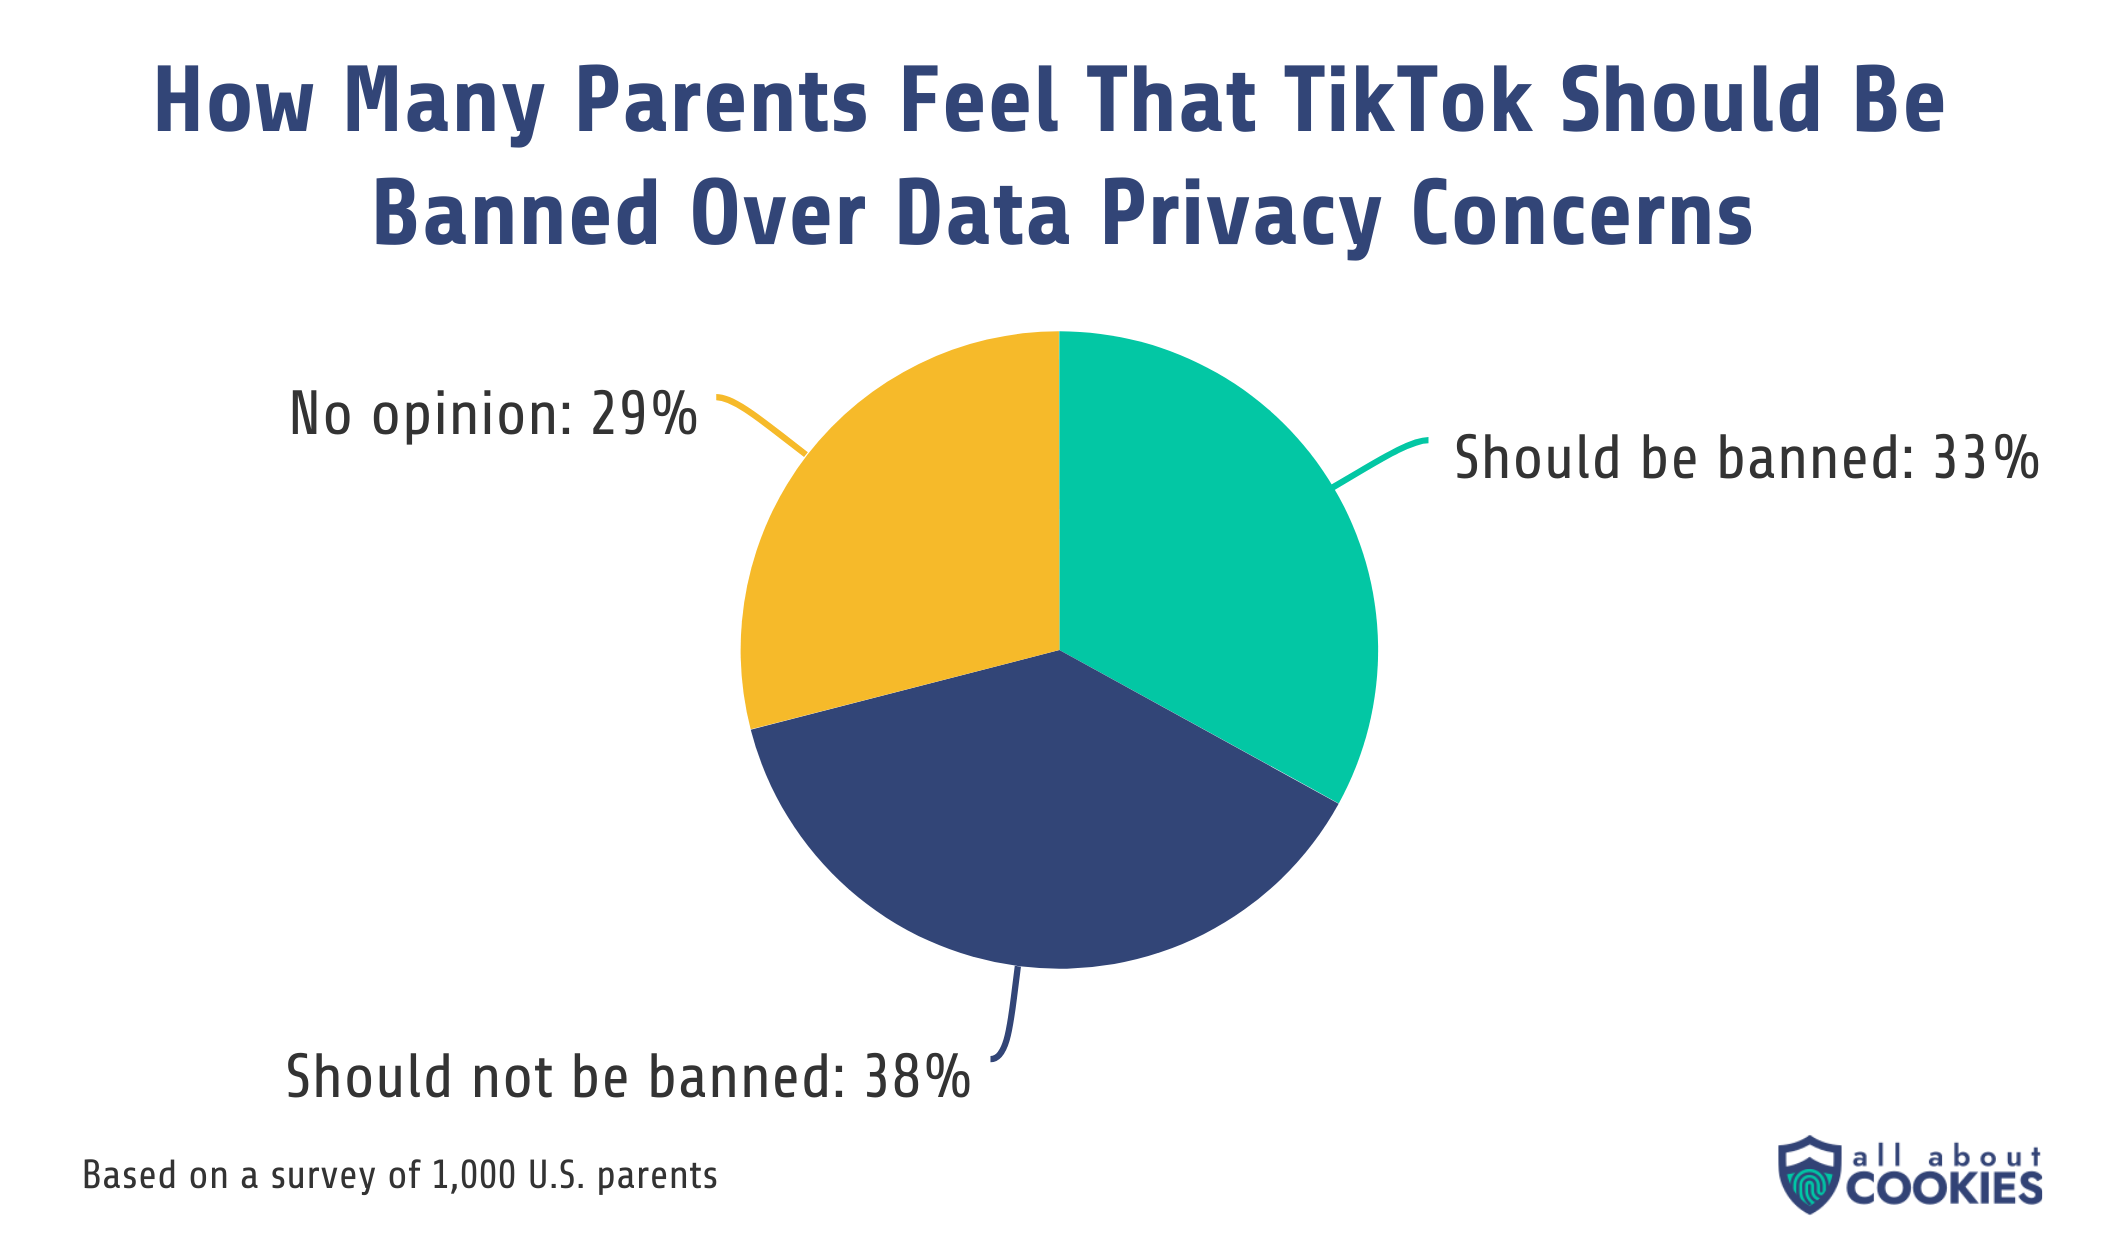 A pie chart shows 33% of parents think TikTok should be banned in the US, while 38% think it shouldn't be banned. 29% have no opinion.